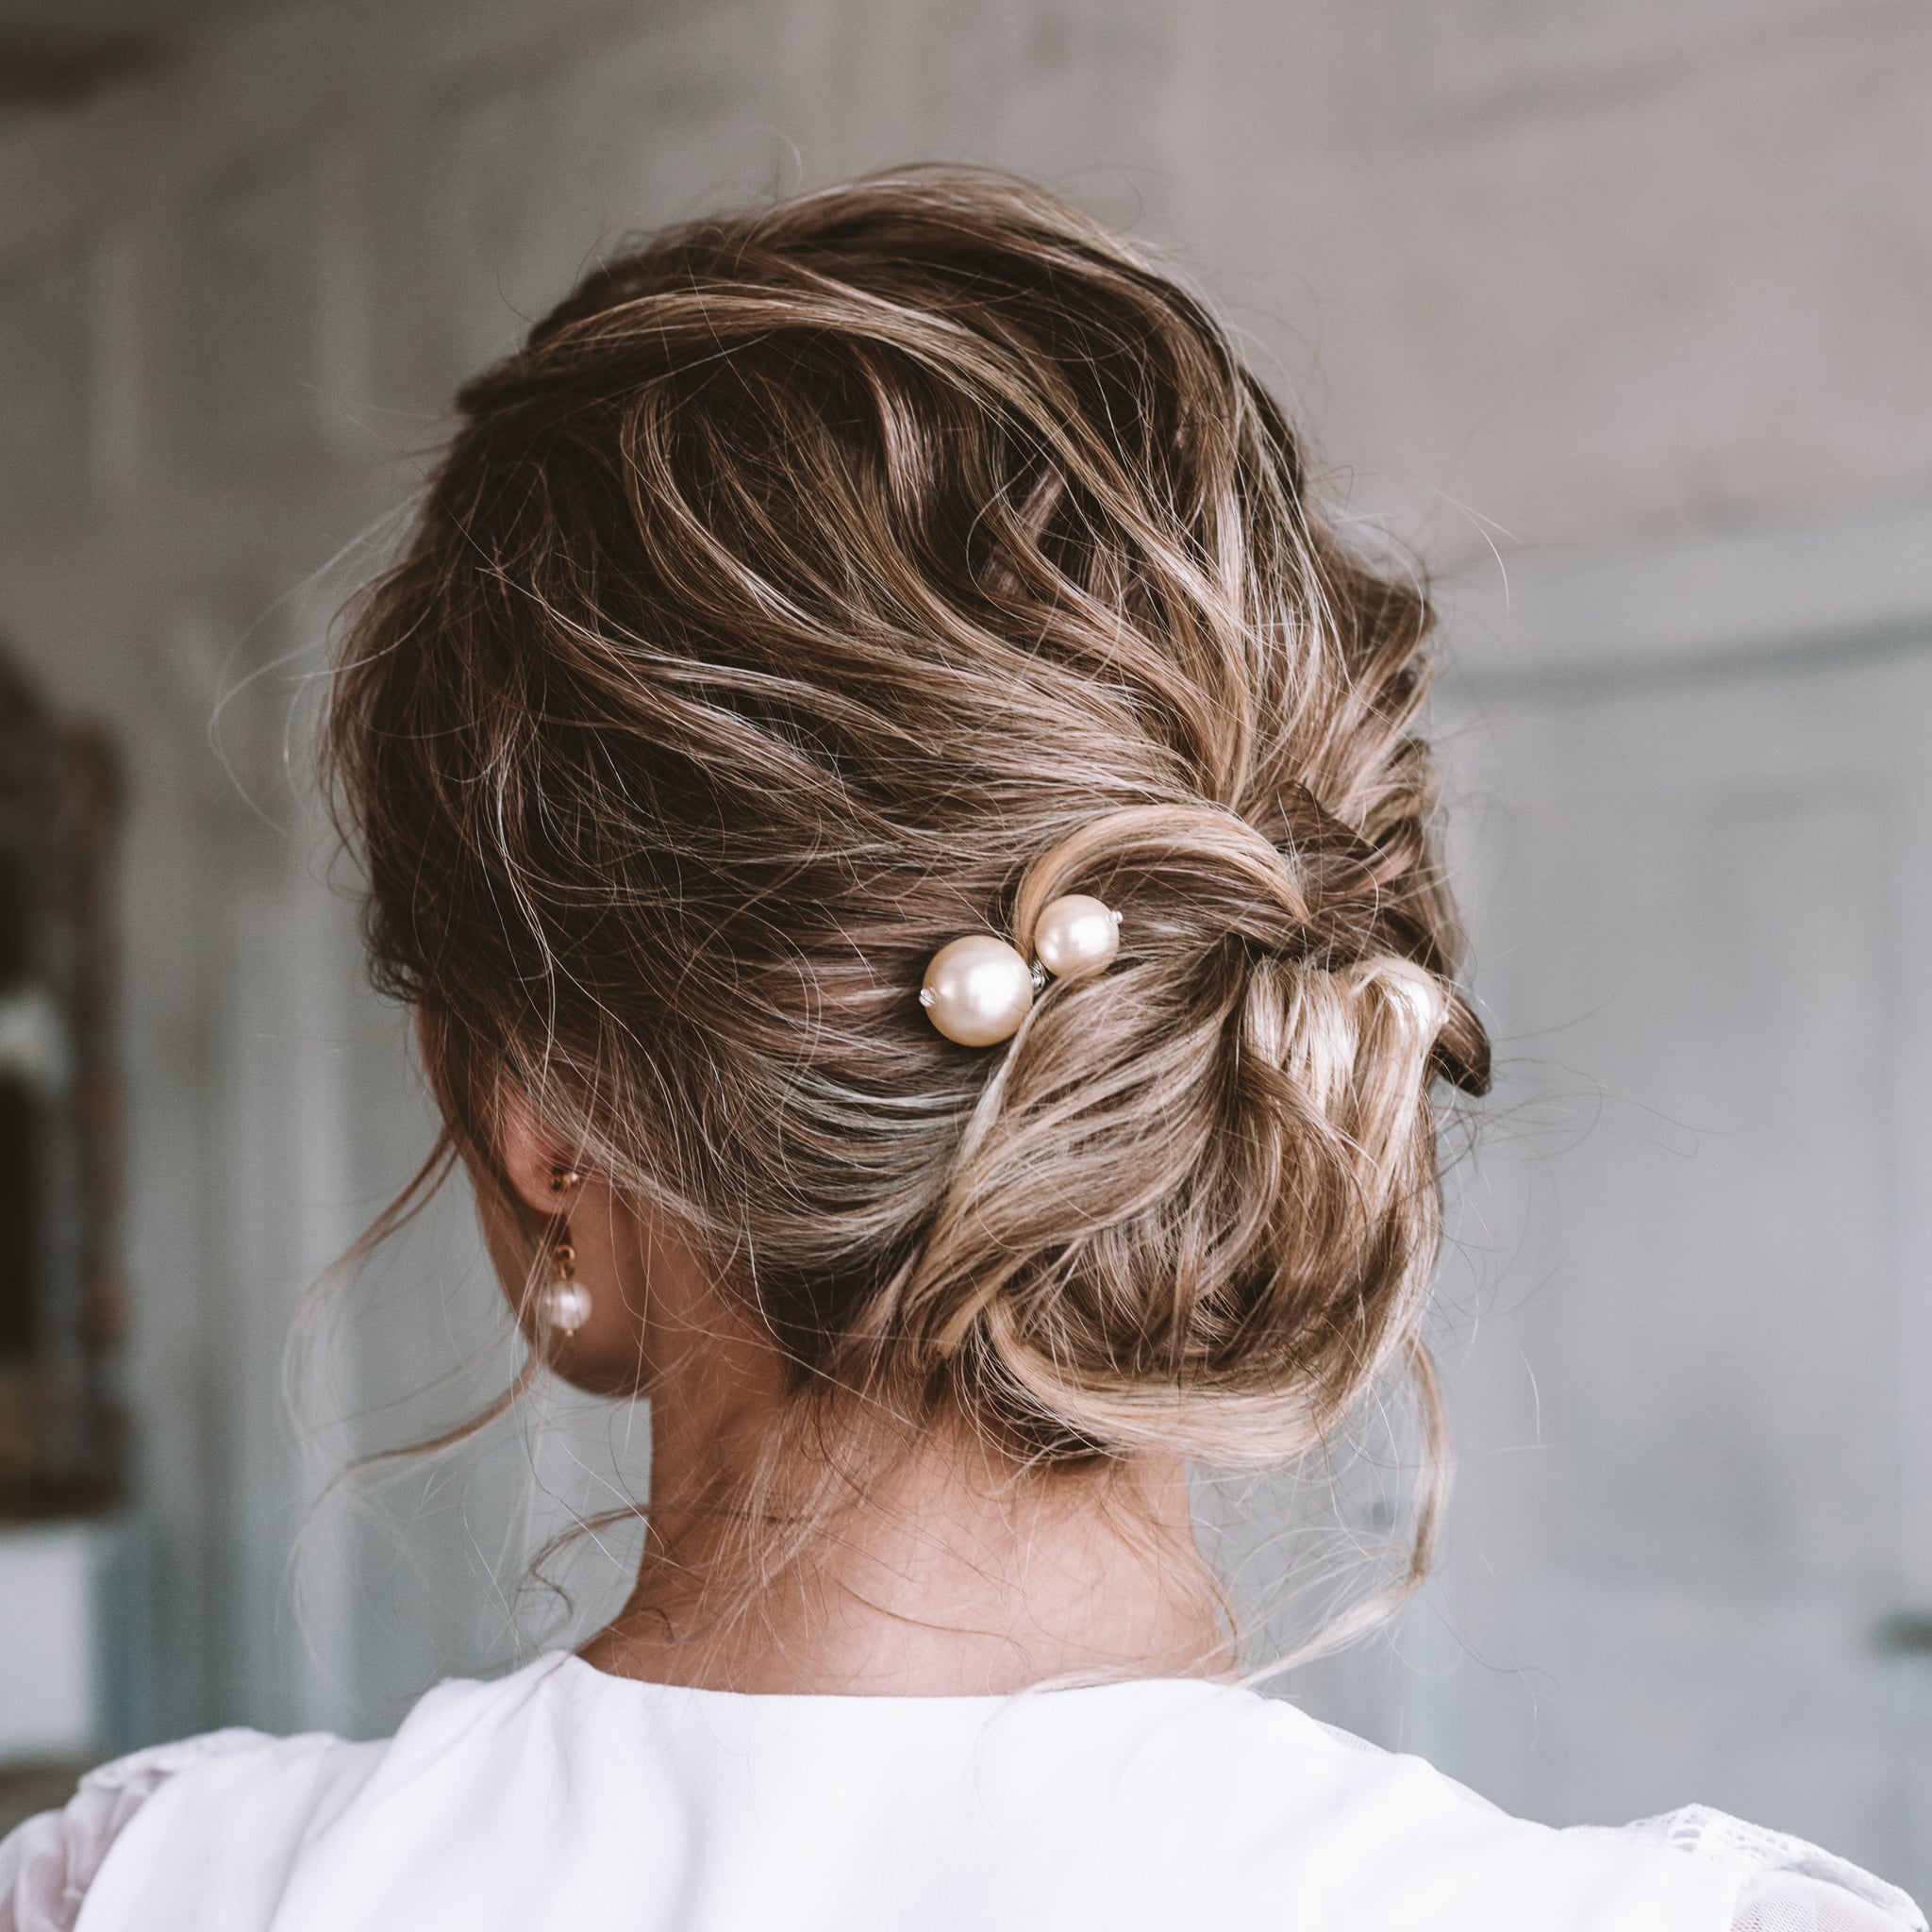 HOW TO EASY EVERYDAY UPDO WITH VOIR HAIRCARE